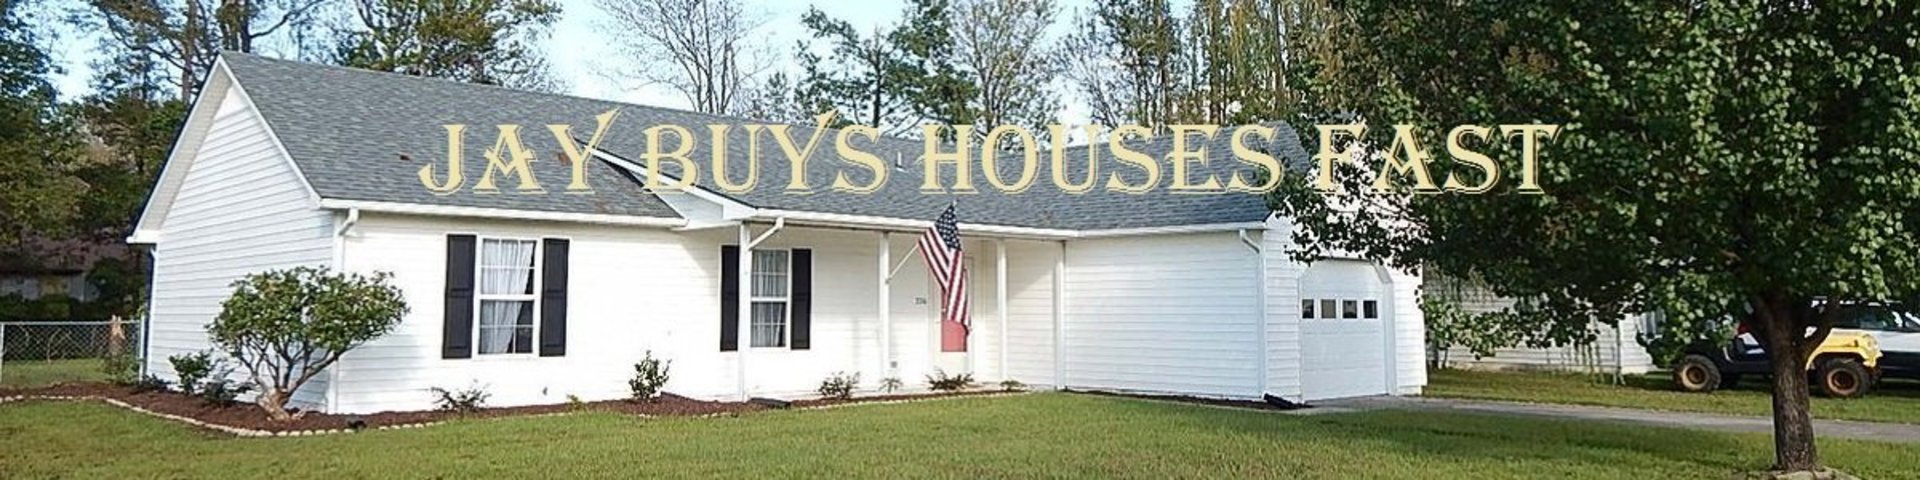 Jay Buys Houses Fast Morehead City